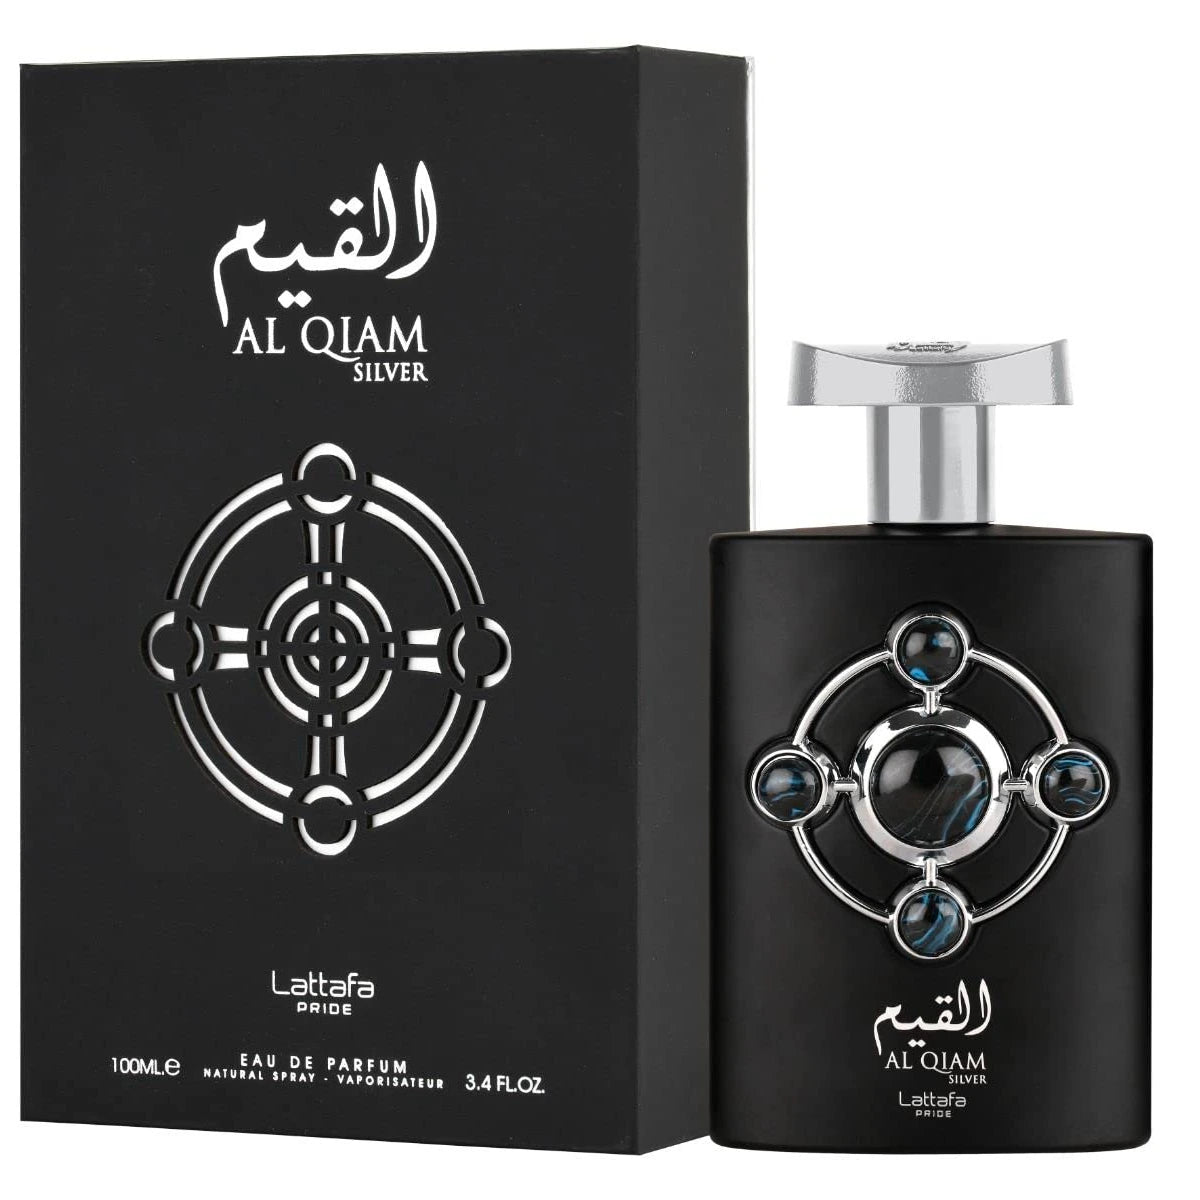 <p data-mce-fragment="1"><em>﻿INSPIRED BY ﻿</em><strong>﻿BVLGARI TYGRE</strong></p>
<p data-mce-fragment="1">Introduced in 2022. Indulge in luxury with Lattafa's Al Qiam Silver. This unisex fragrance combines notes of refreshing grapefruit and fiery ginger with the warmth of sandalwood and musk. Designed for those who appreciate the finer things in life, Al Qiam Silver is the perfect choice for any occasion.</p>